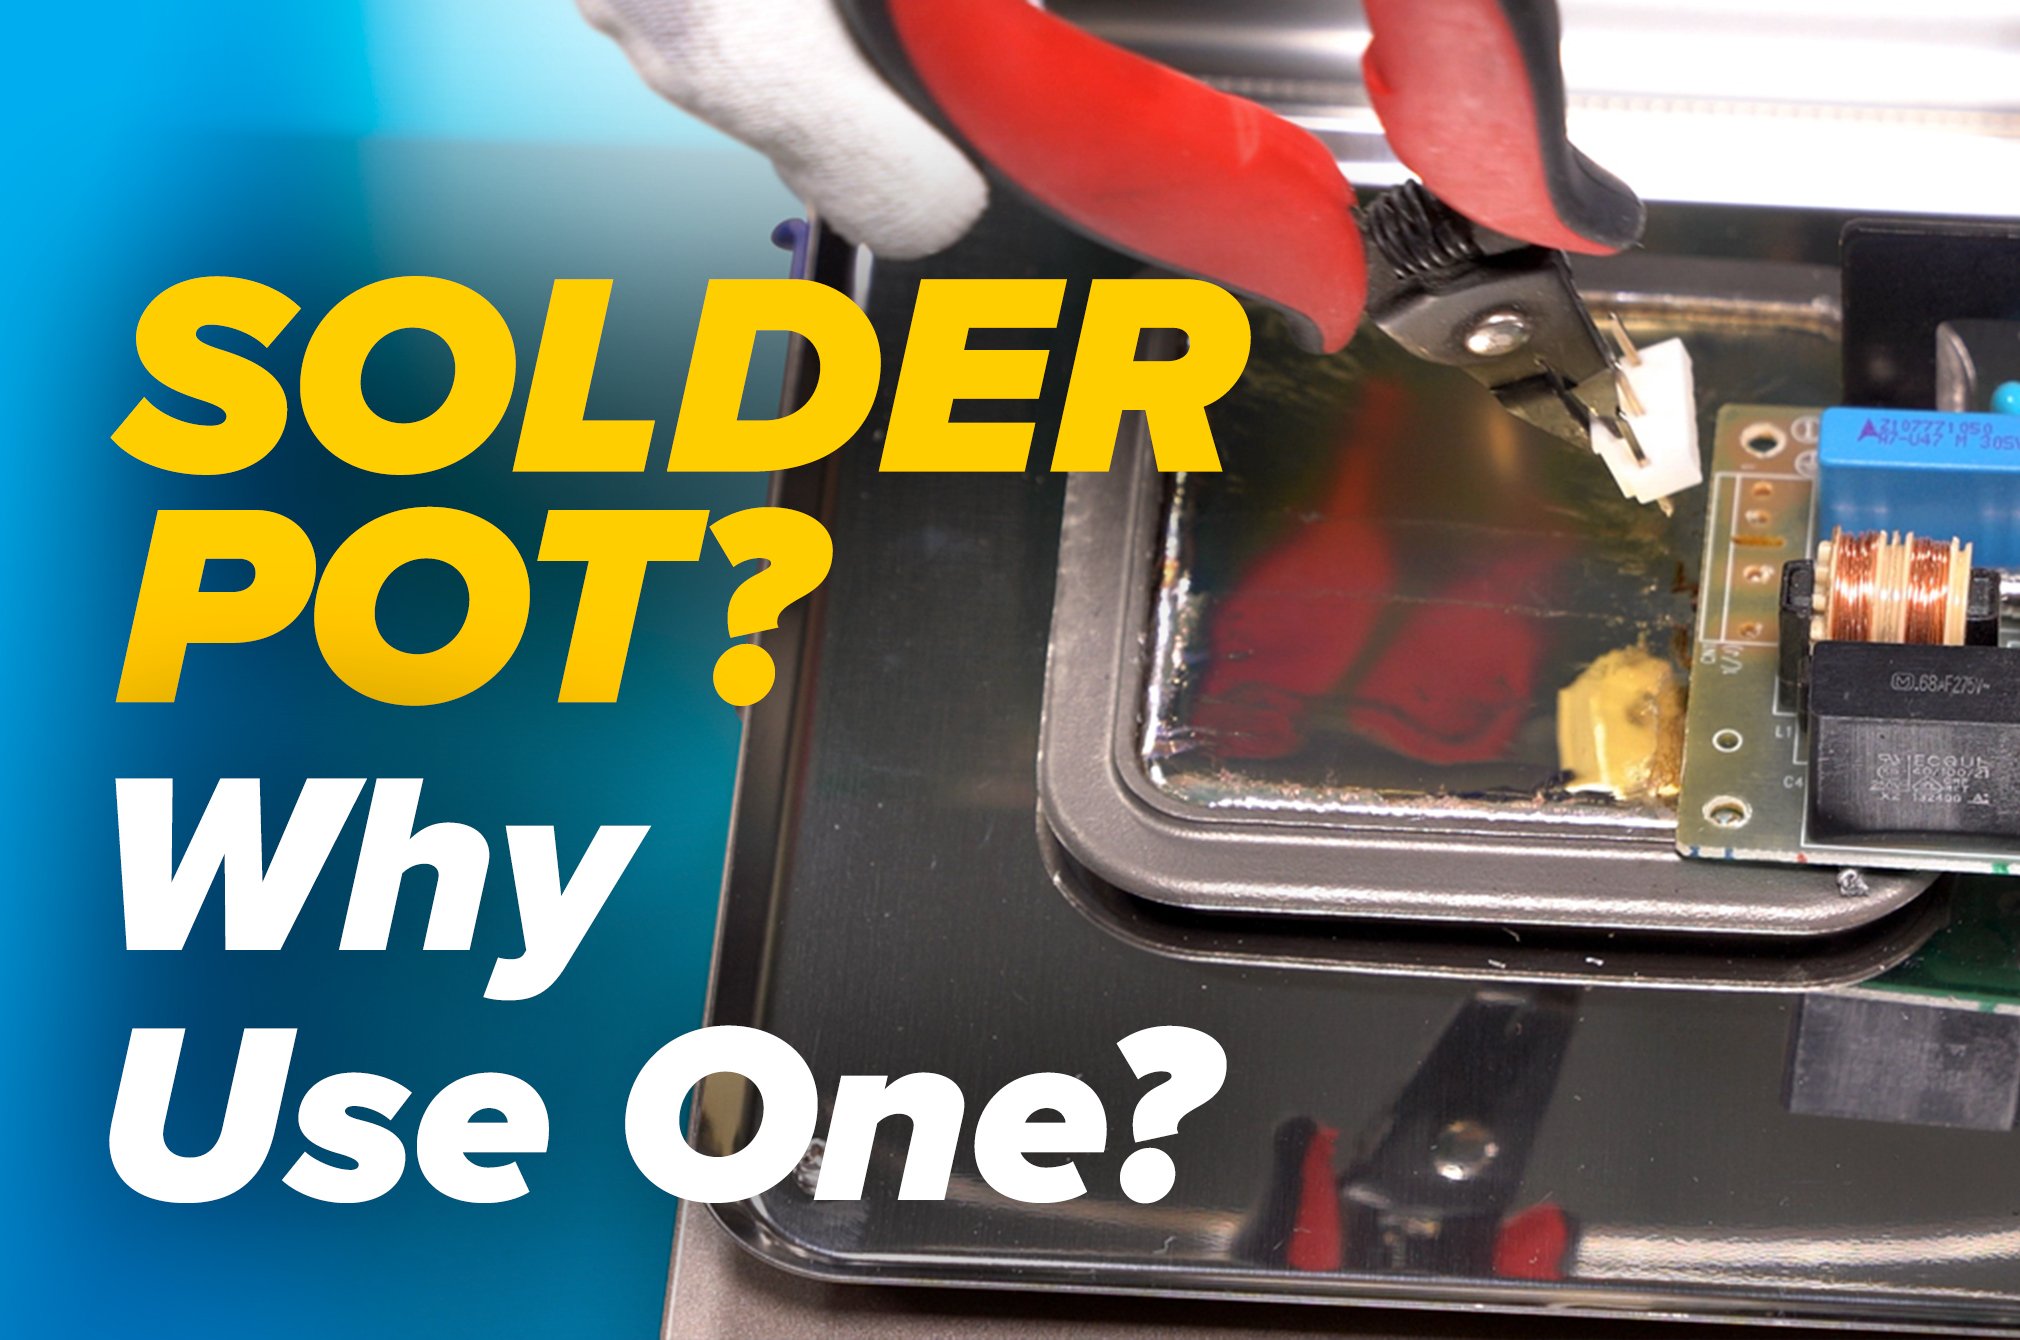 Solder Pot? Why Use One?